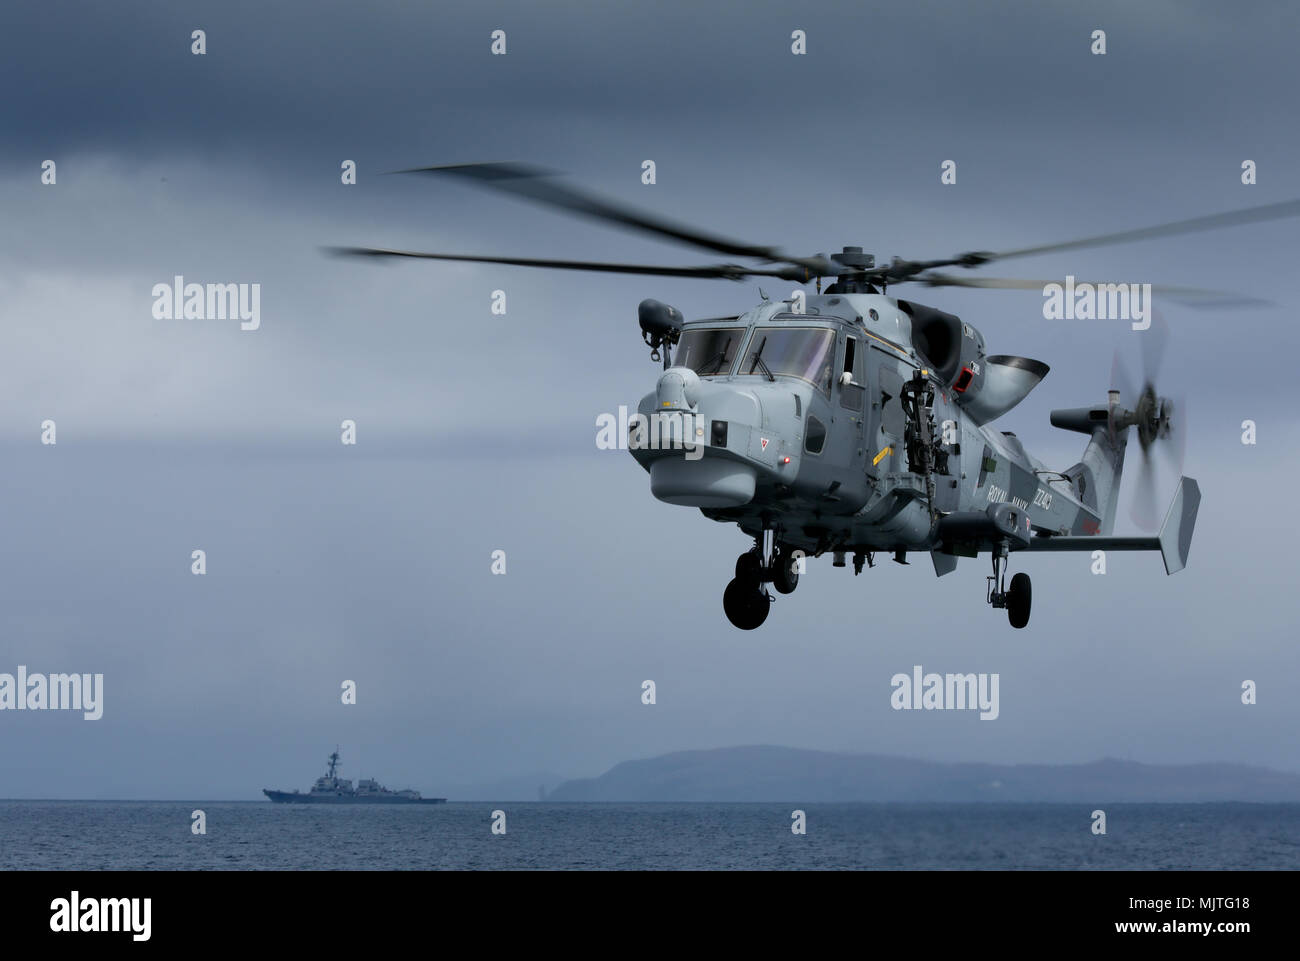 Wildcat helicopter operated by the Royal Navy Stock Photo